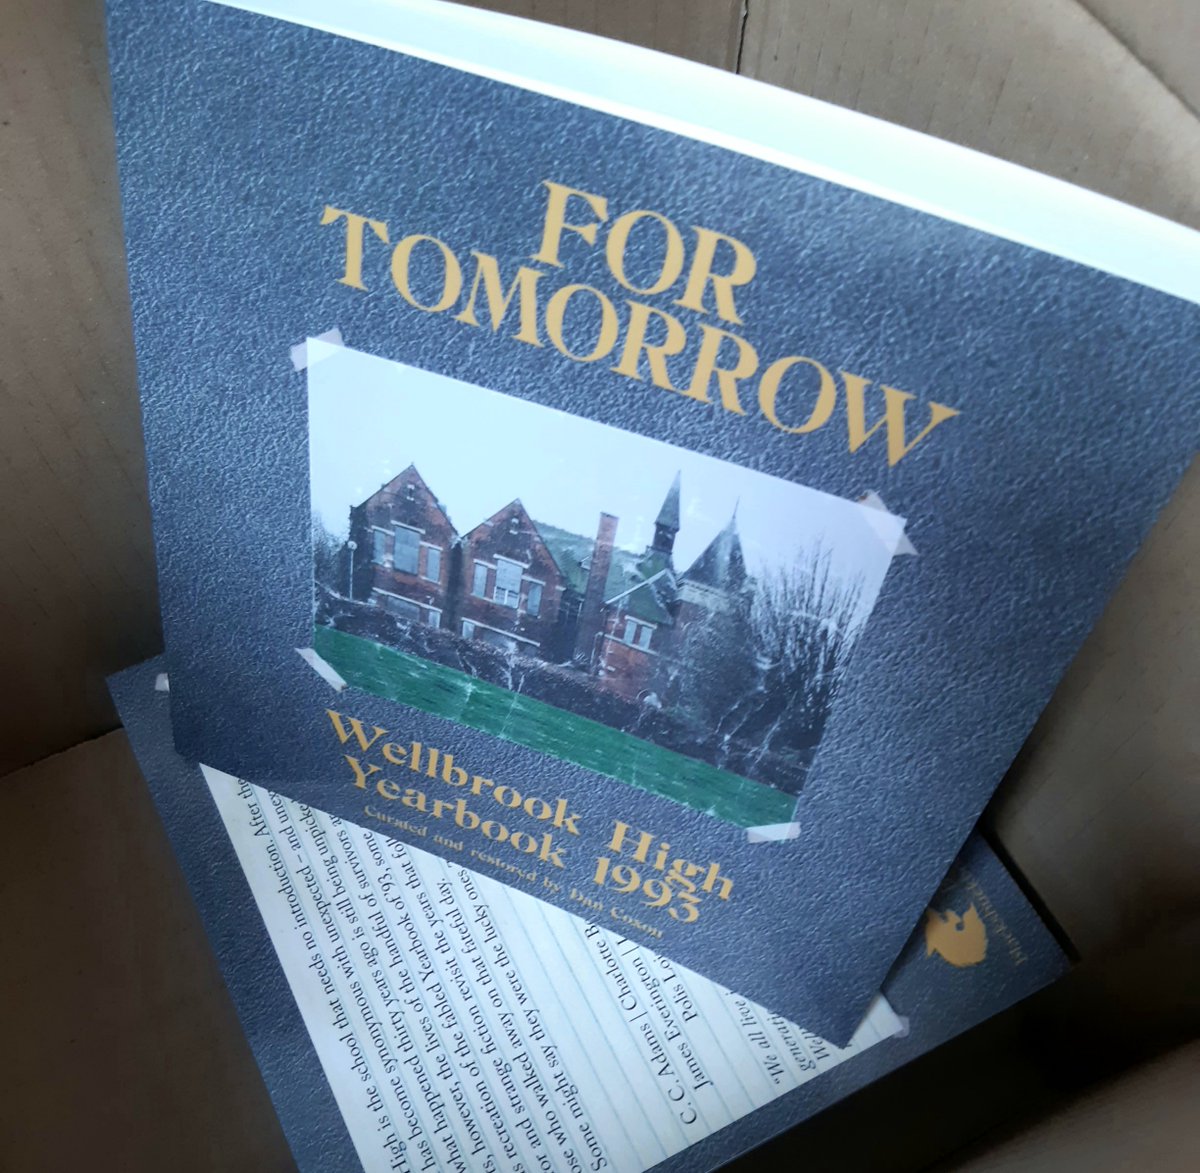 If any UK reviewers/bloggers would like a review copy of my latest anthology, For Tomorrow: Wellbrook High Yearbook 1993, then comment below or message me and we'll work something out. Runalong the Shelves has already called it 'a standout modern horror collection'. #bookblog